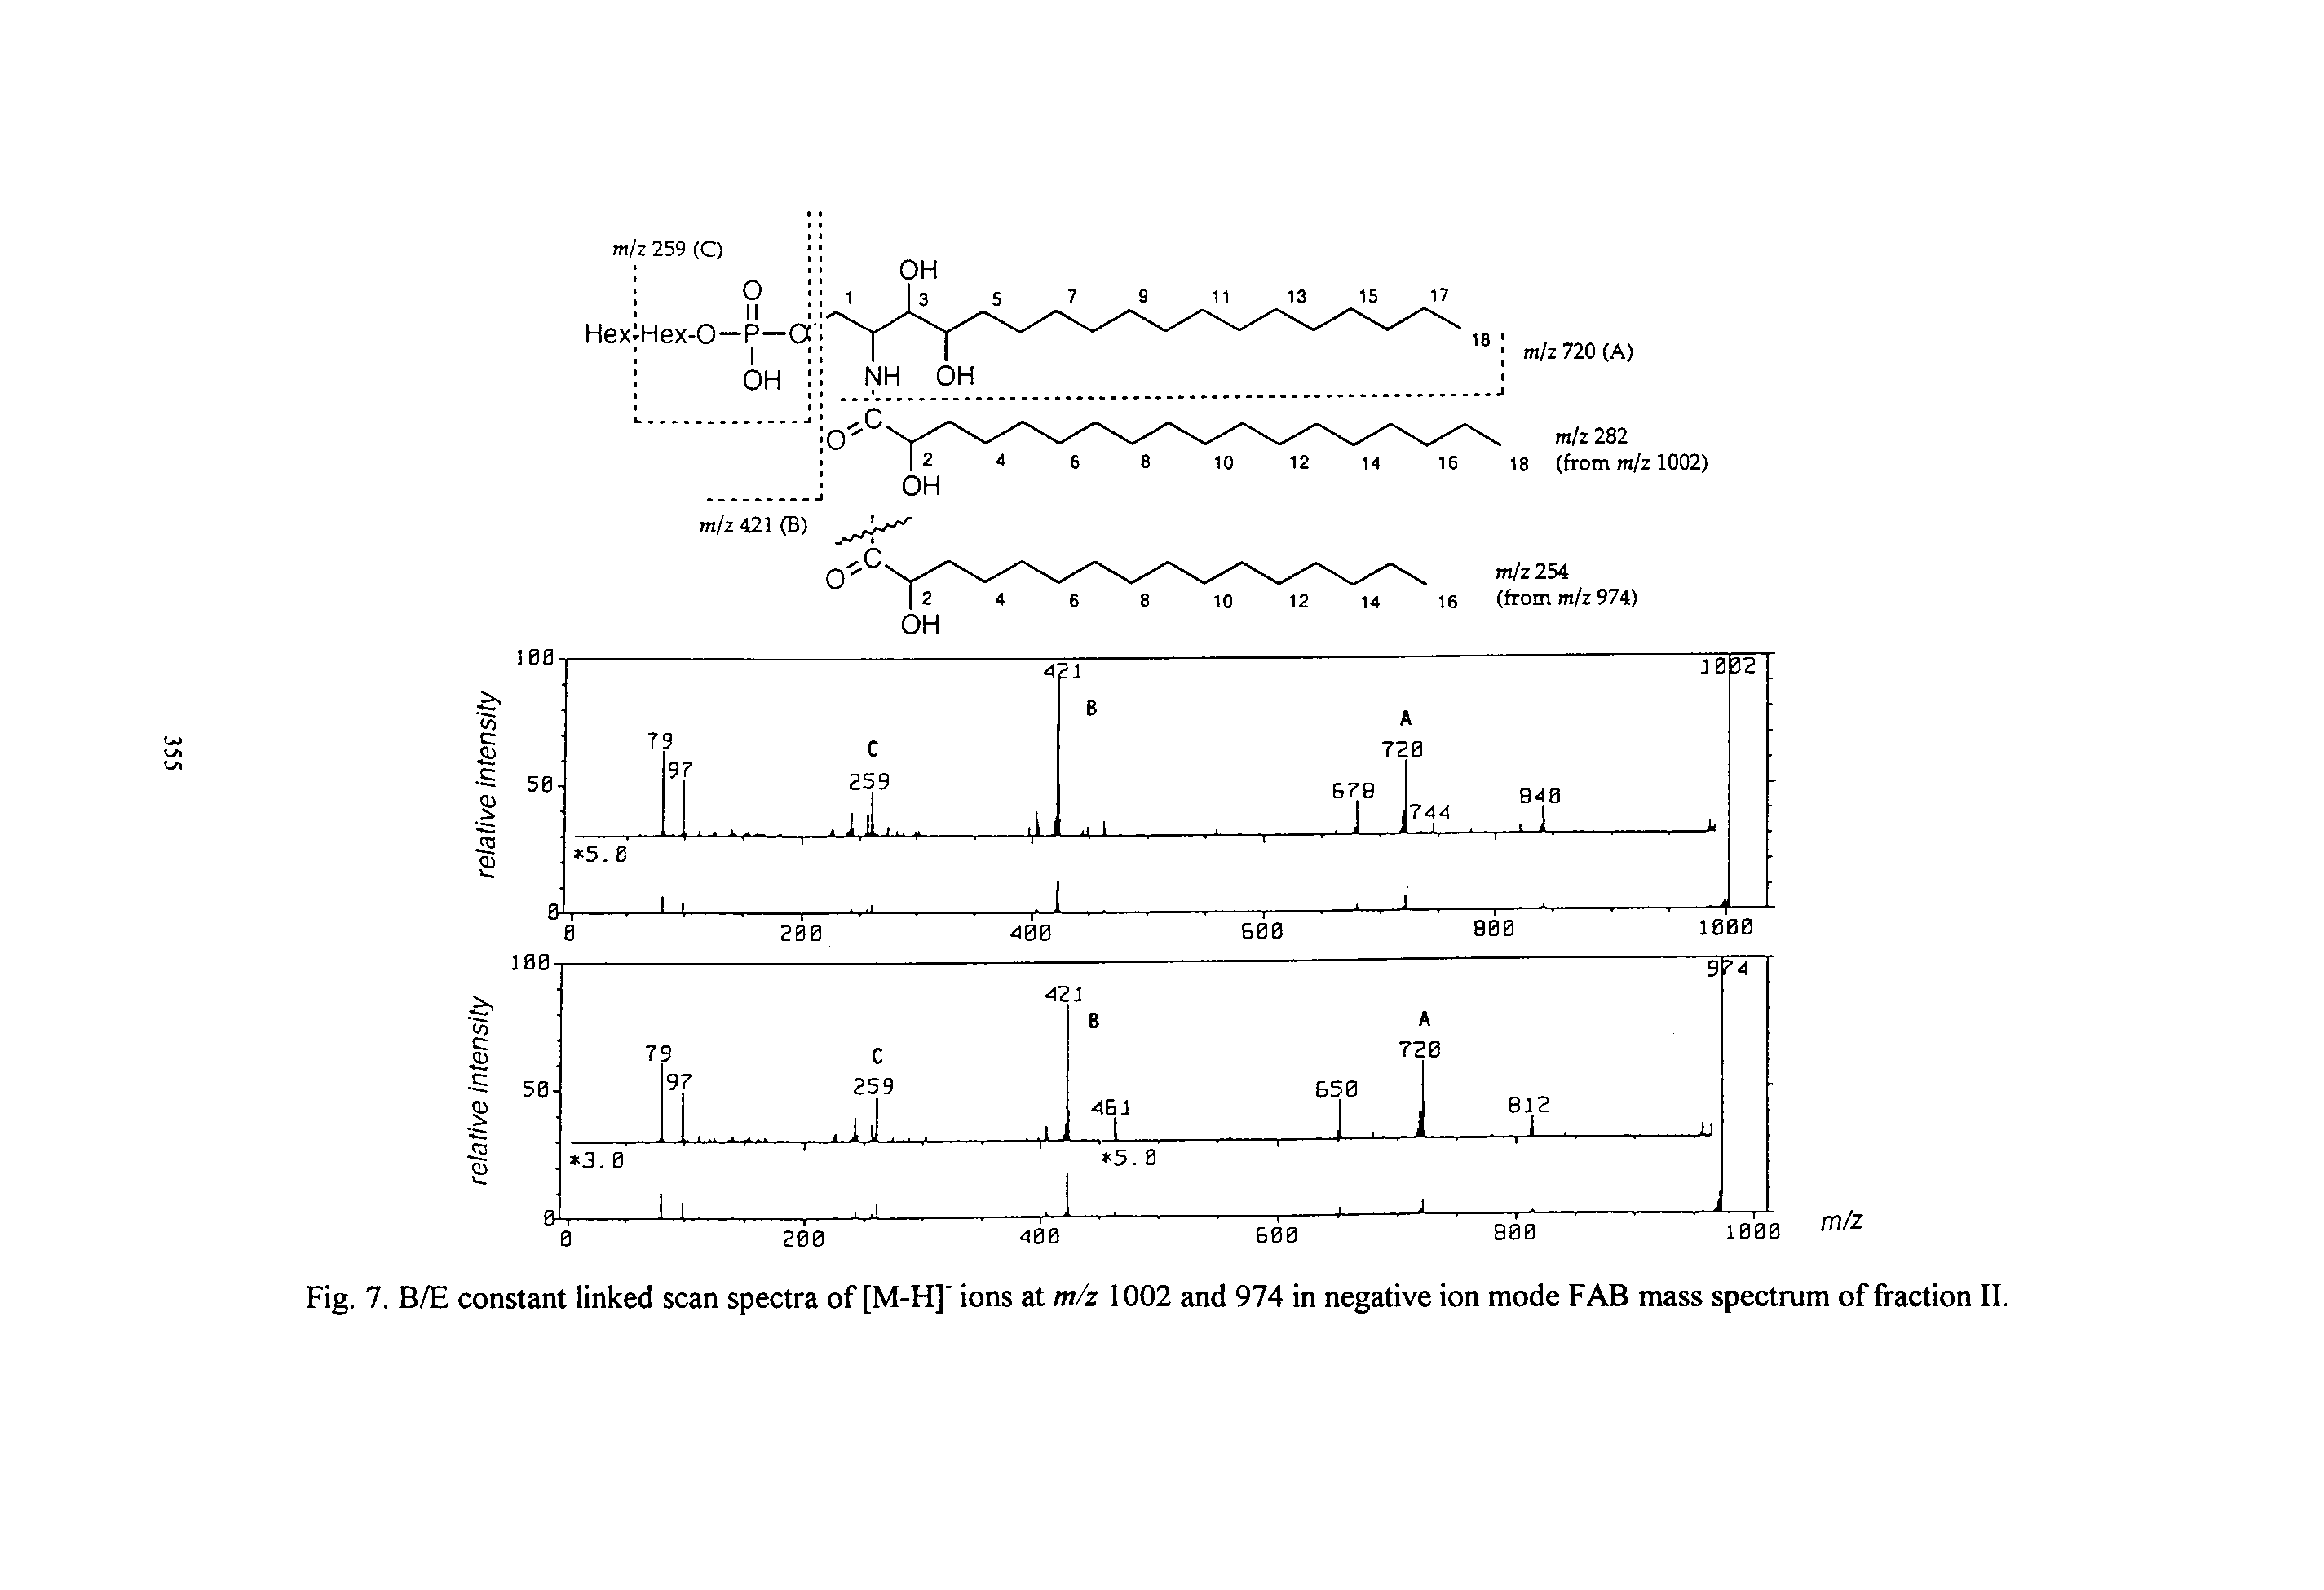 Fig. 7. B/E constant linked scan spectra of [M-H] ions at m/z 1002 and 974 in negative ion mode FAB mass spectrum of fraction II.